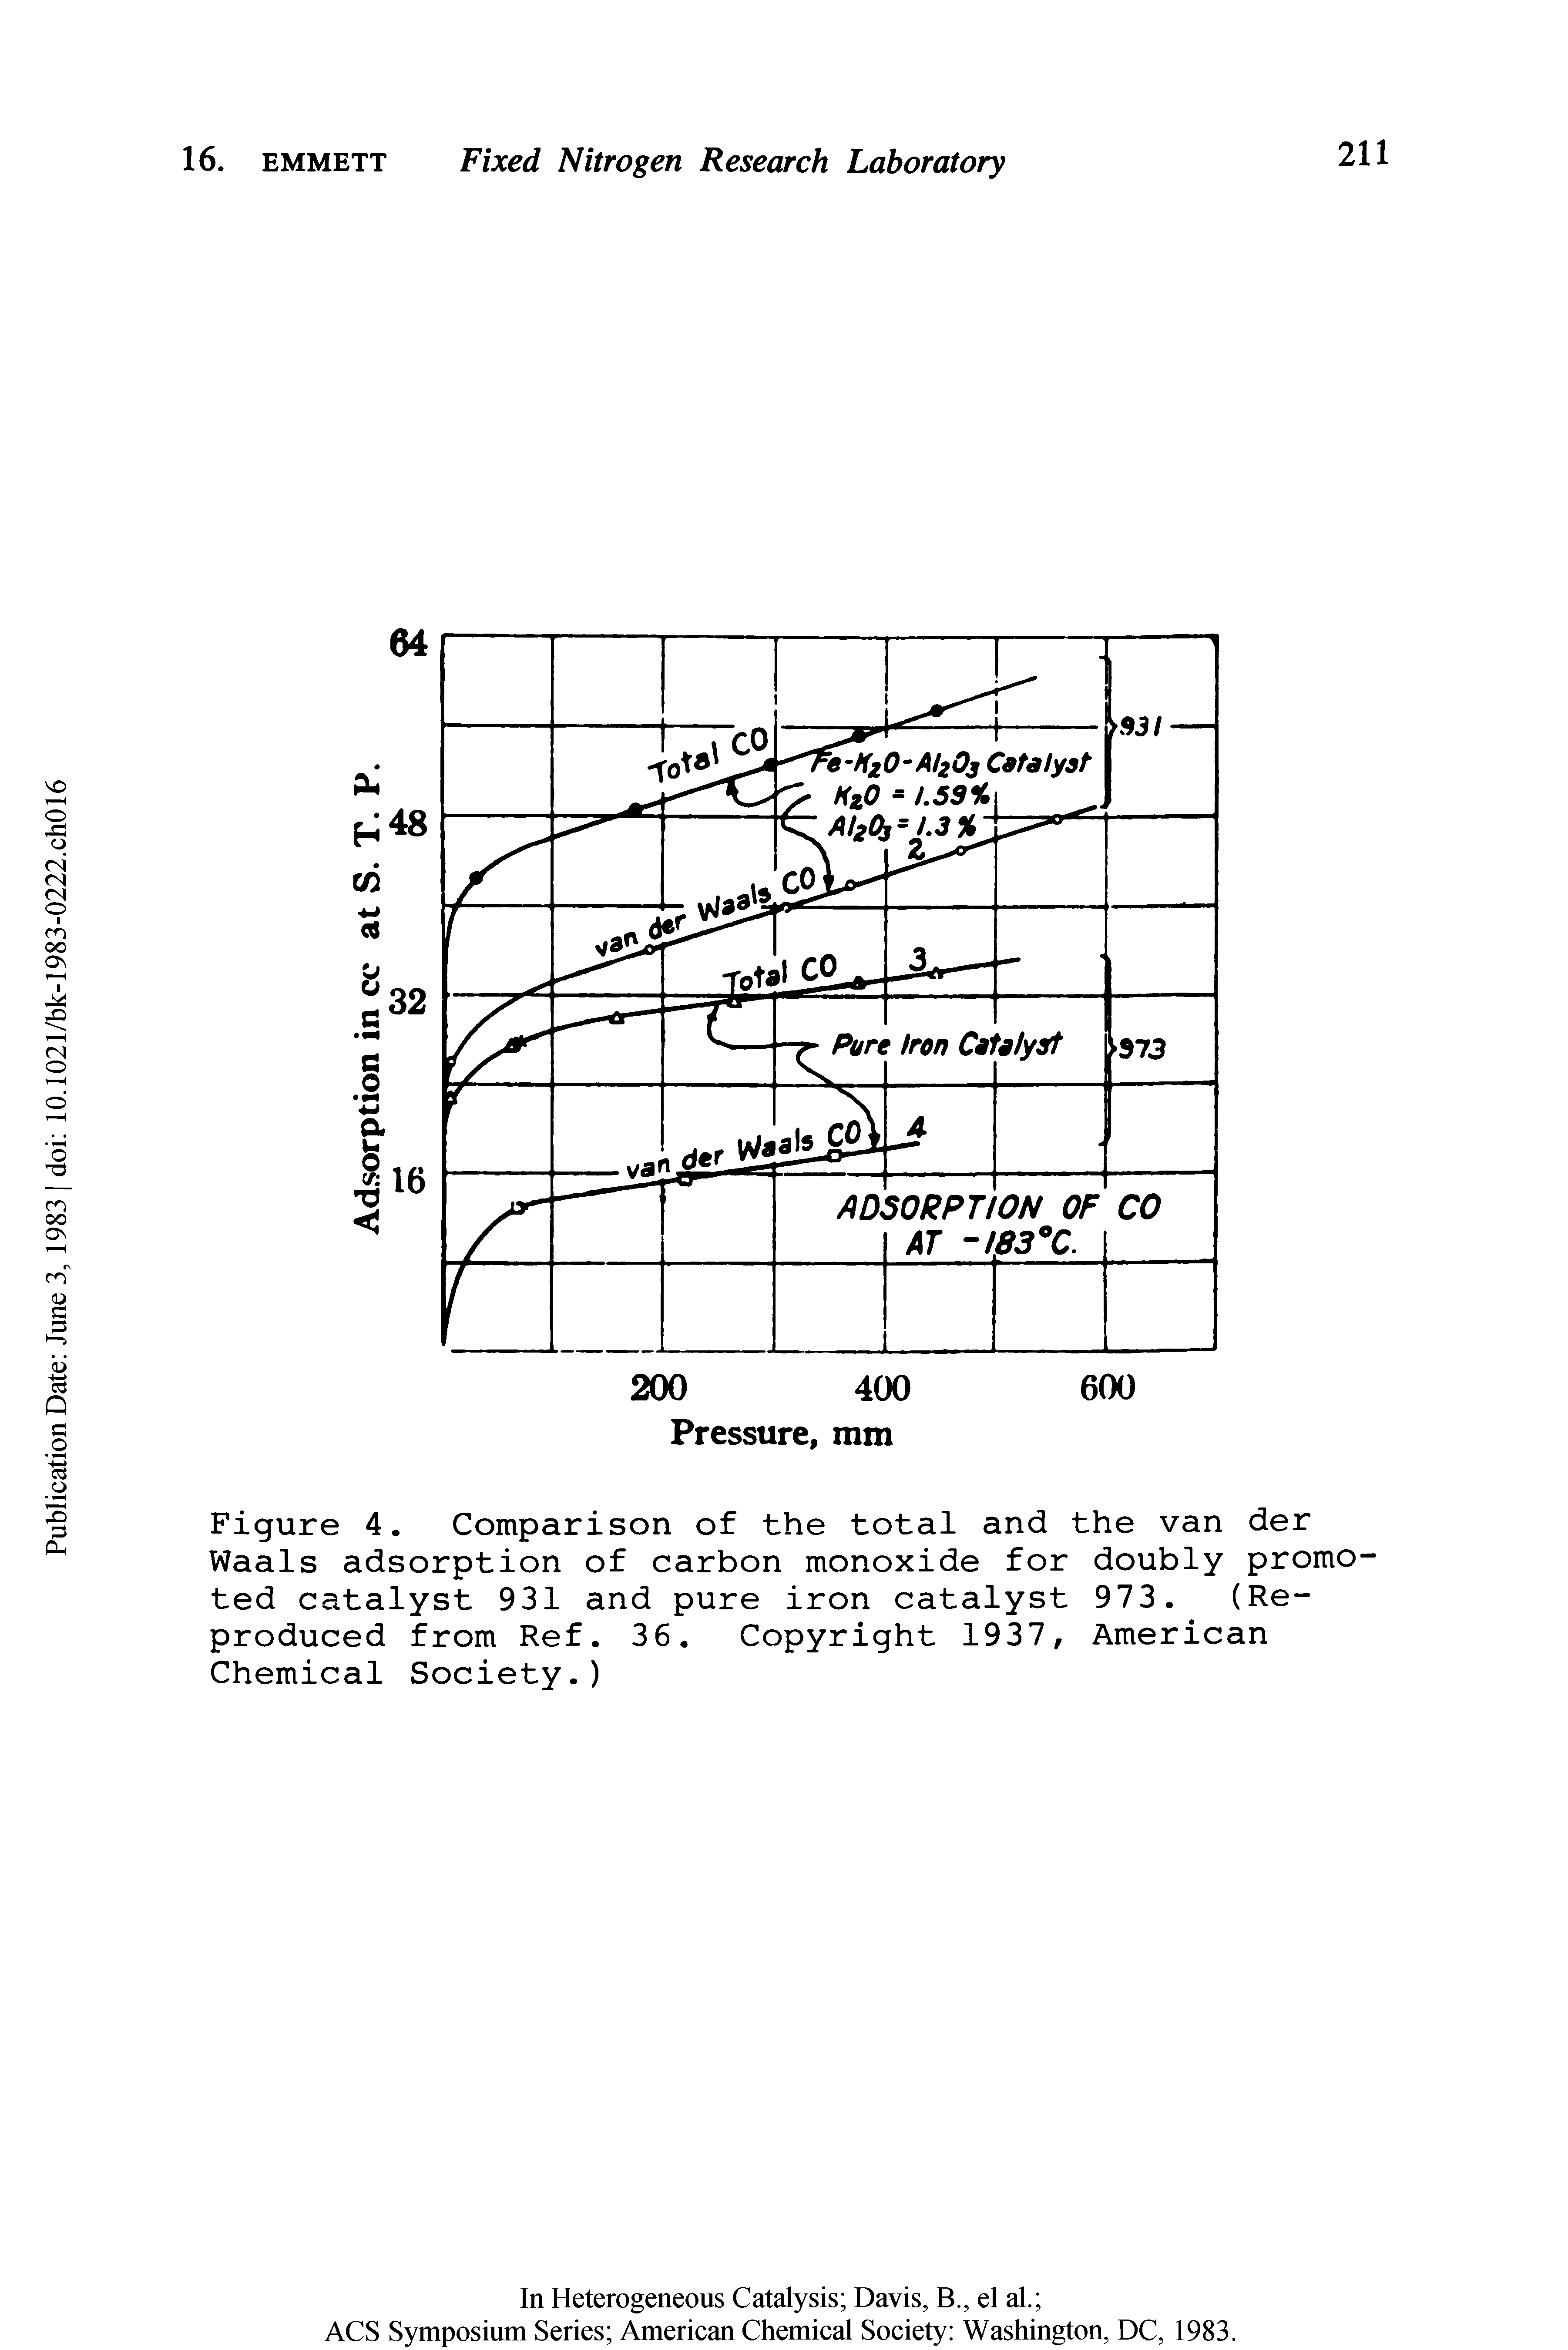 Figure 4. Comparison of the total and the van der Waals adsorption of carbon monoxide for doubly promoted catalyst 931 and pure iron catalyst 973. (Reproduced from Ref. 36. Copyright 1937, American Chemical Society.)...